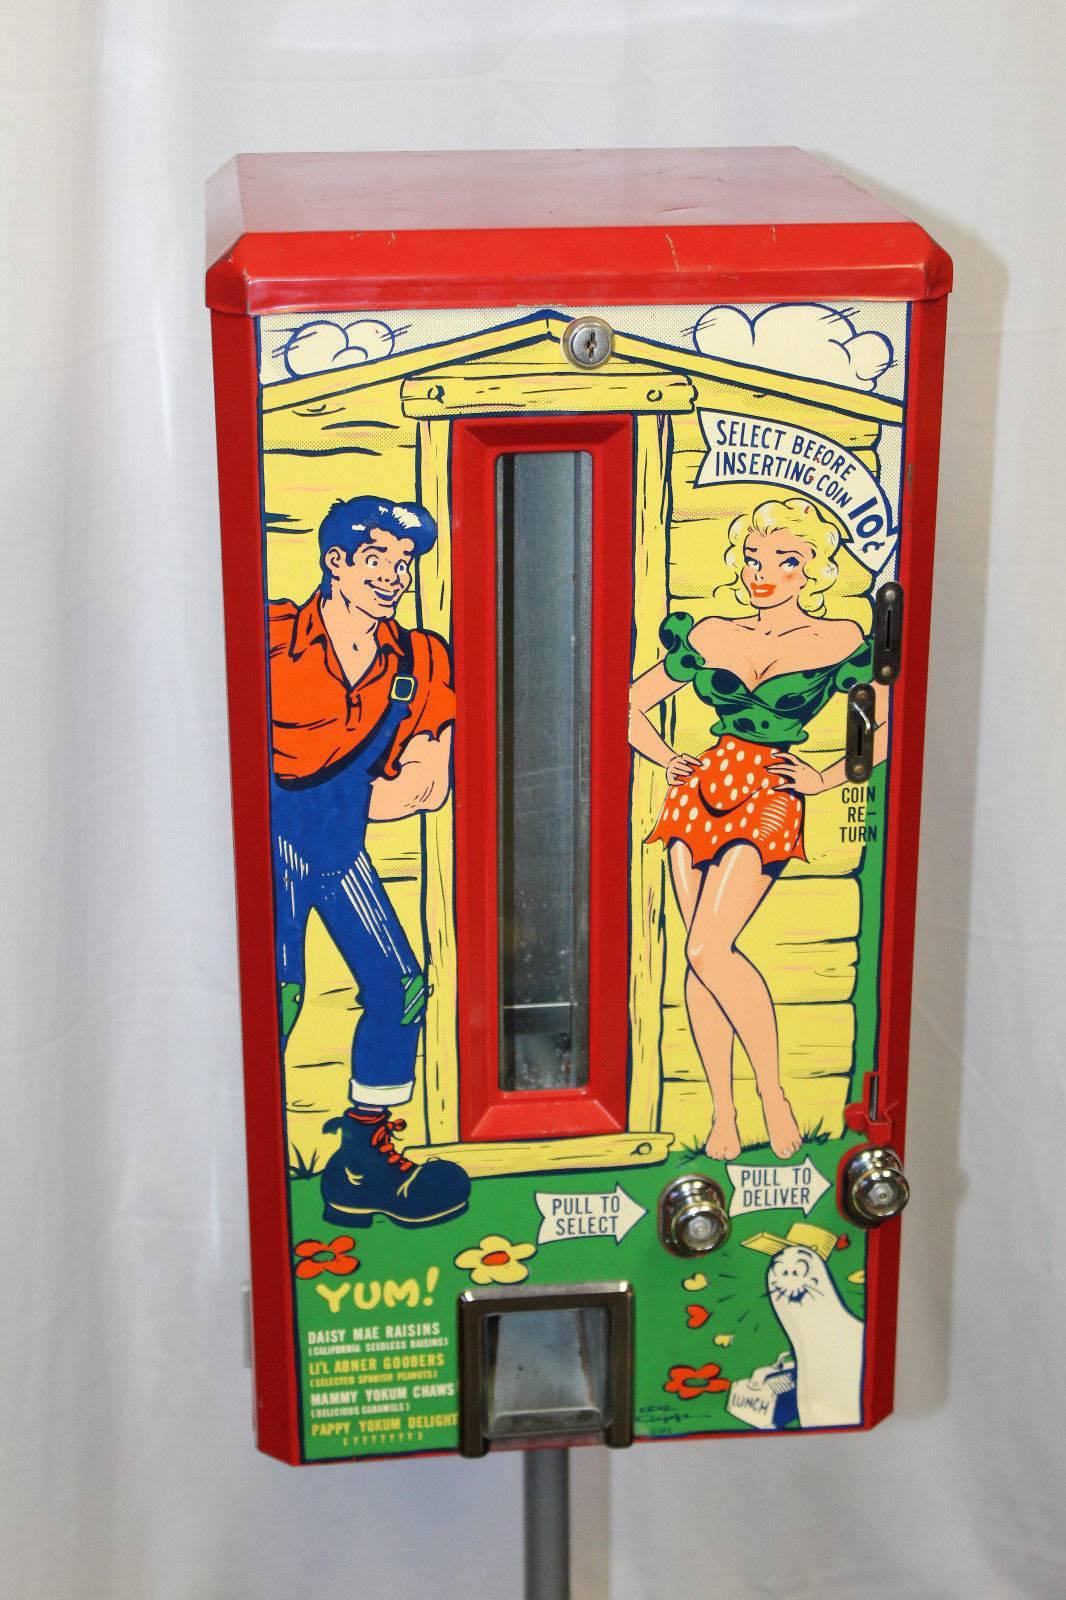 California Dispenser Co. Mechanical steel candy machine with long glass window at front and dime slot. Three sides have illustrations of Dogpatch characters including - Li'l Abner, Daisy Mae, Mammy Yokum, Pappy Yokum, Shmoo. Machine used to offer